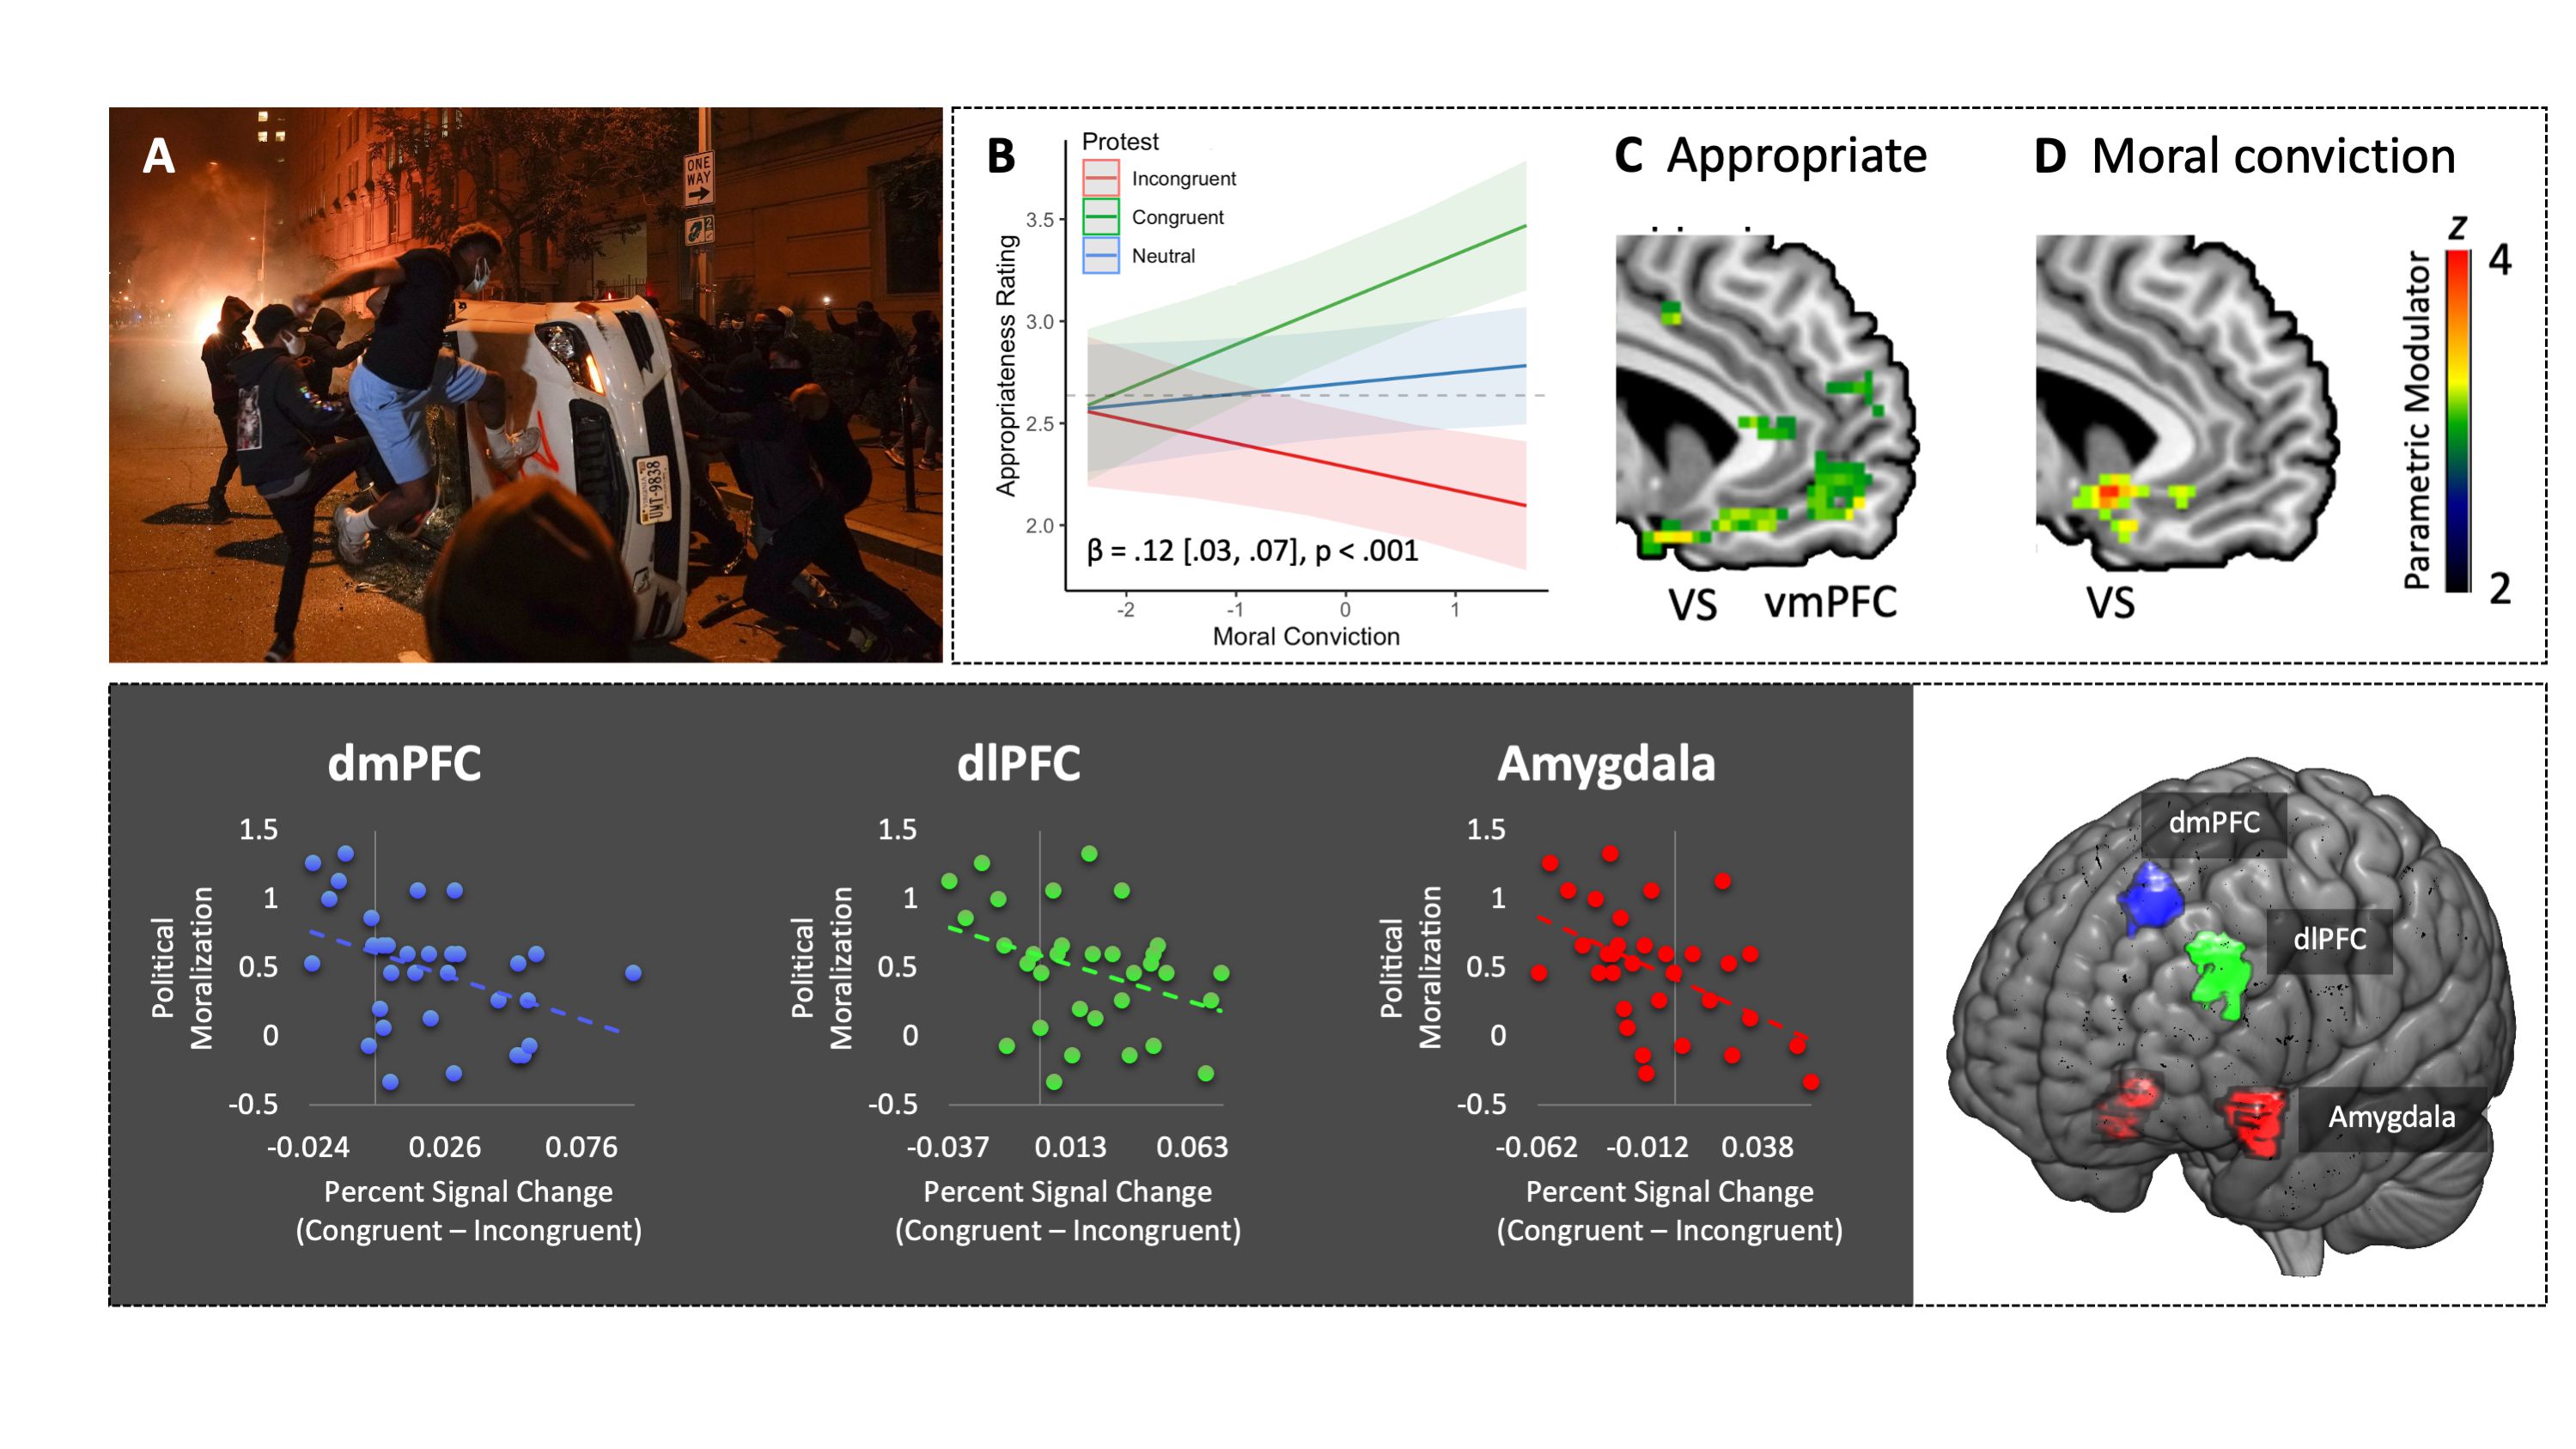 Figure 2: Moral convictions shape the perception and evaluation of violence in the brain circuit, implementing the coding subjective reward value. In the MRI scanner, participants were presented with photographs of violent riots (A) which were either congruent or incongruent with their moral beliefs and political attitudes (B). Parametric increases in neuro-hemodynamic signal in the ventromedial prefrontal cortex (vmPFC) and ventral striatum (VS) predicted evaluations of congruent causes (C) and the intensity of participants' moral convictions (D). The more moralized and legitimate the violence was perceived, the greater a reduction in signal was detected in the dorsomedial prefrontal cortex (dmPFC), dorsolateral prefrontal cortex (dlPFC) and amygdala. Adapted from Workman, Yoder & Decety, 2020).